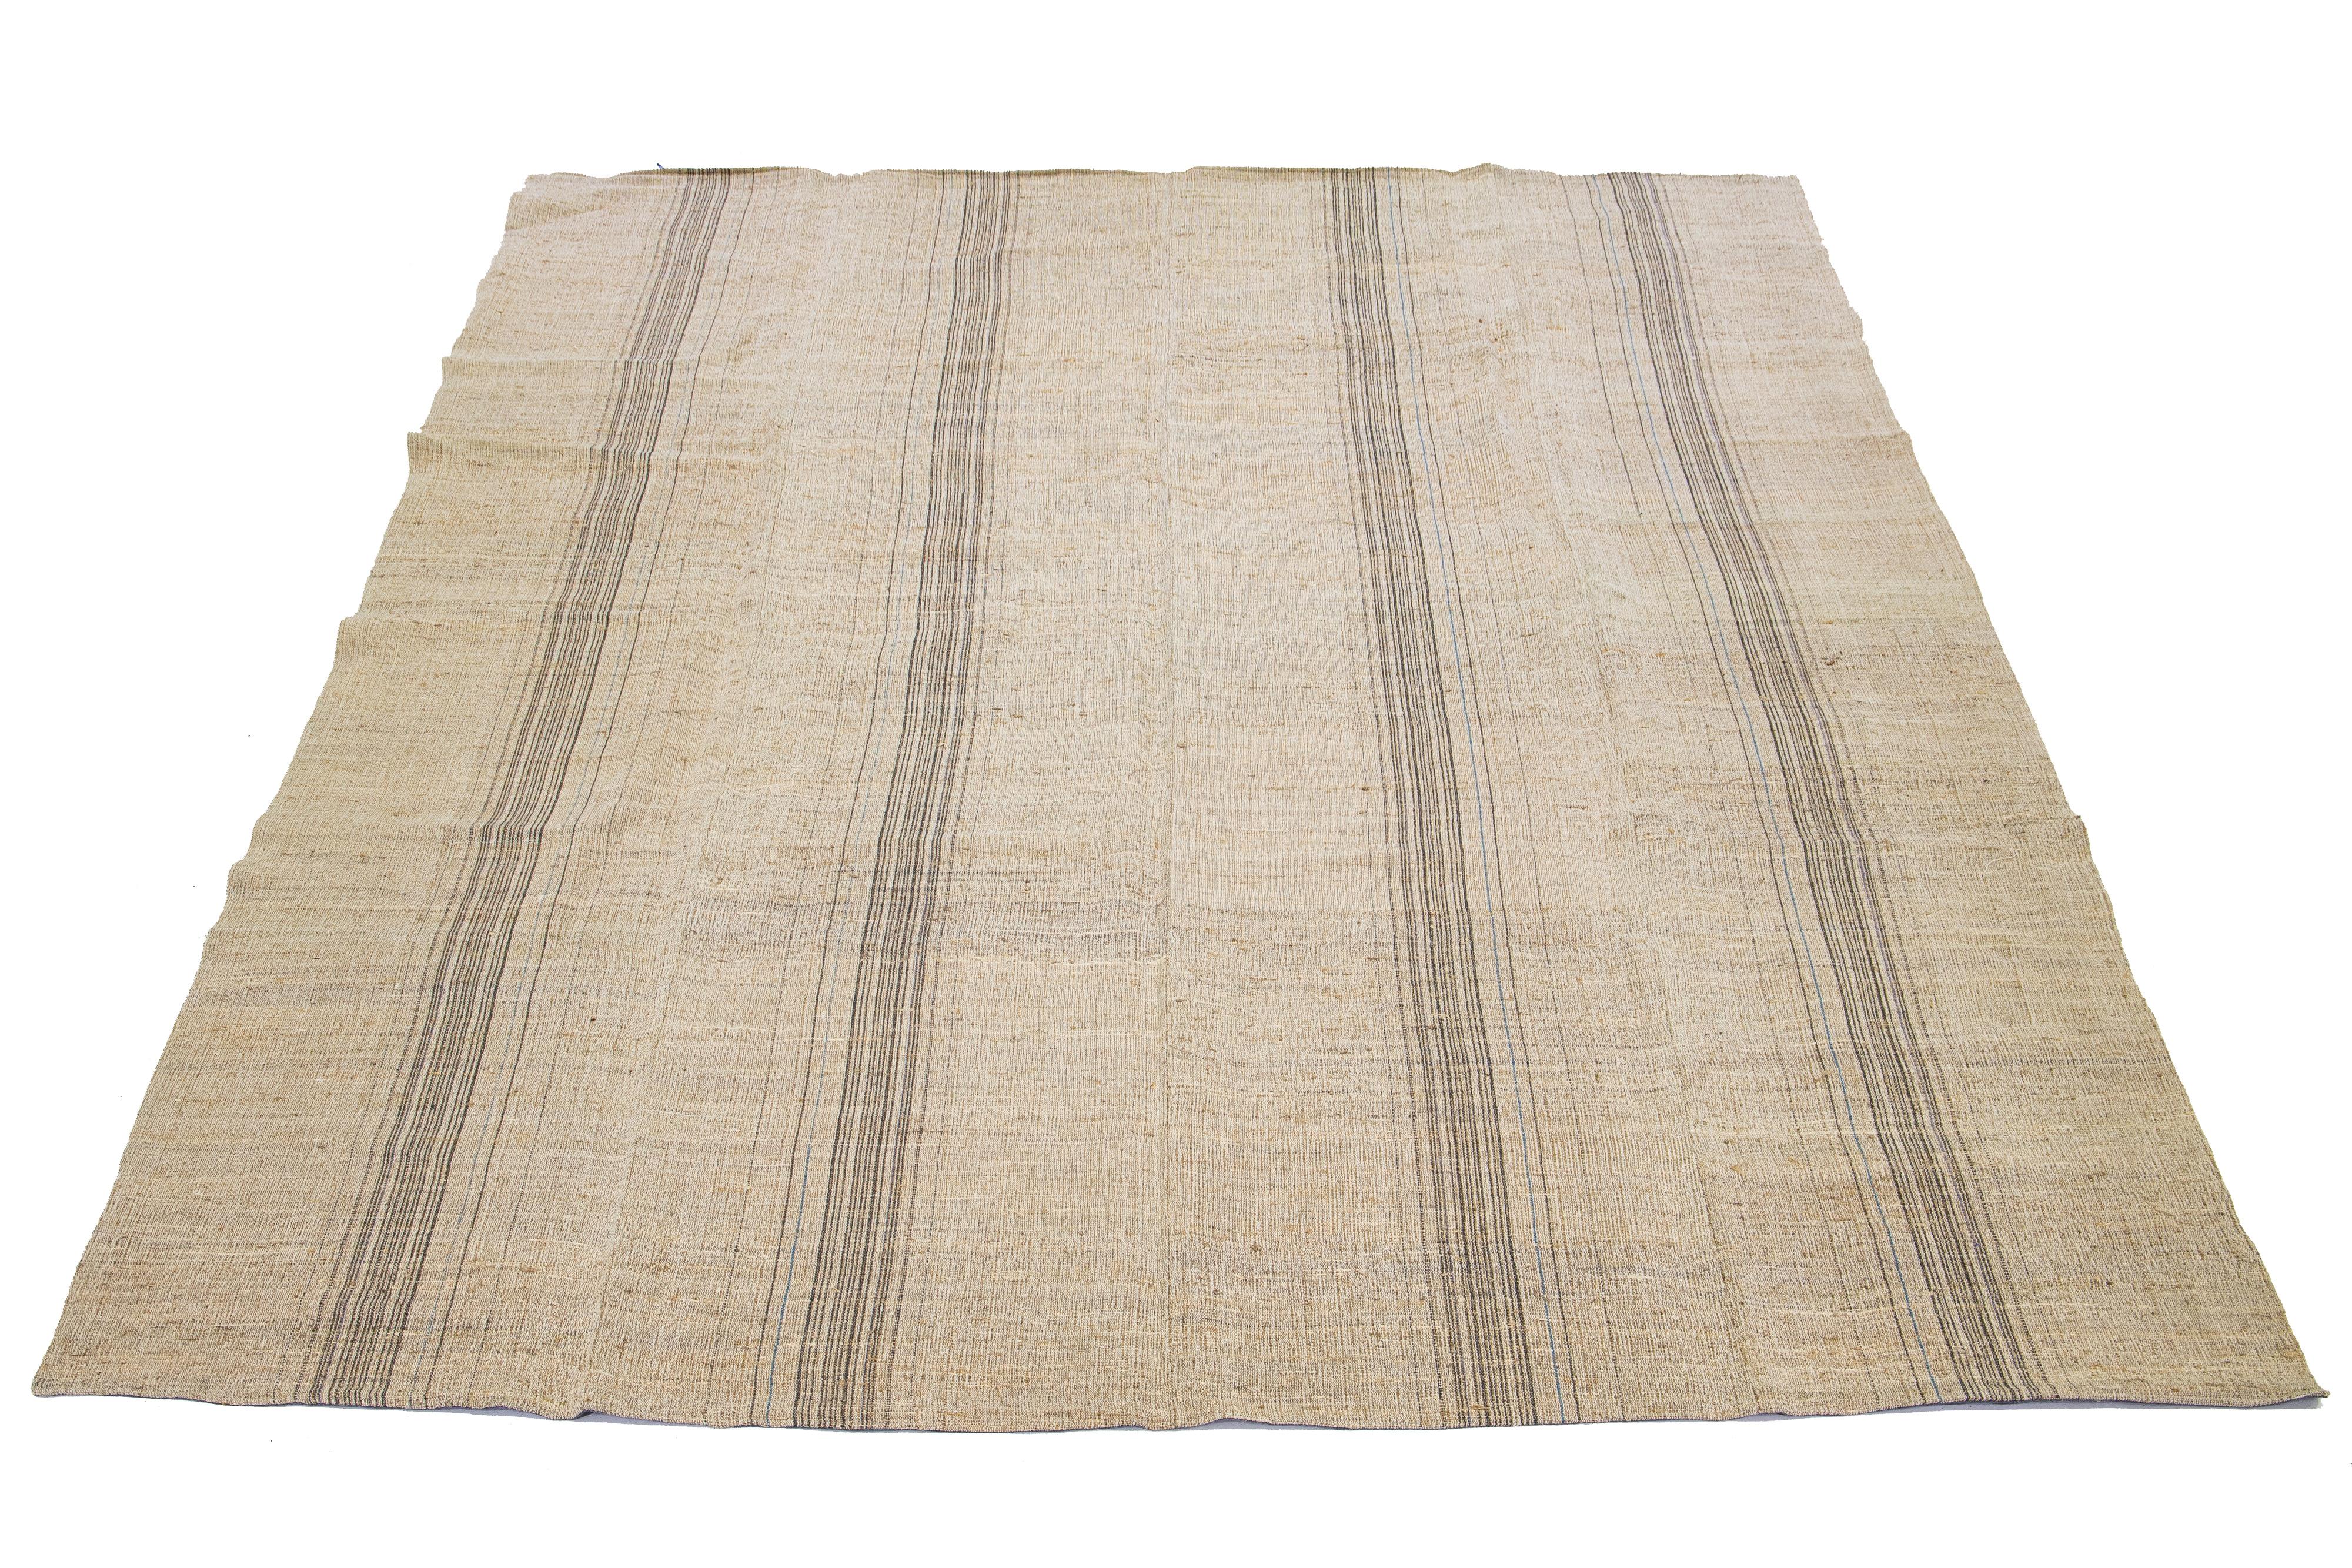 This Indian rug showcases a contemporary Kilim flatweave style crafted from wool. The rug has a light brown field with a striped pattern in blue and black shades.

This rug measures 10' x 13'3